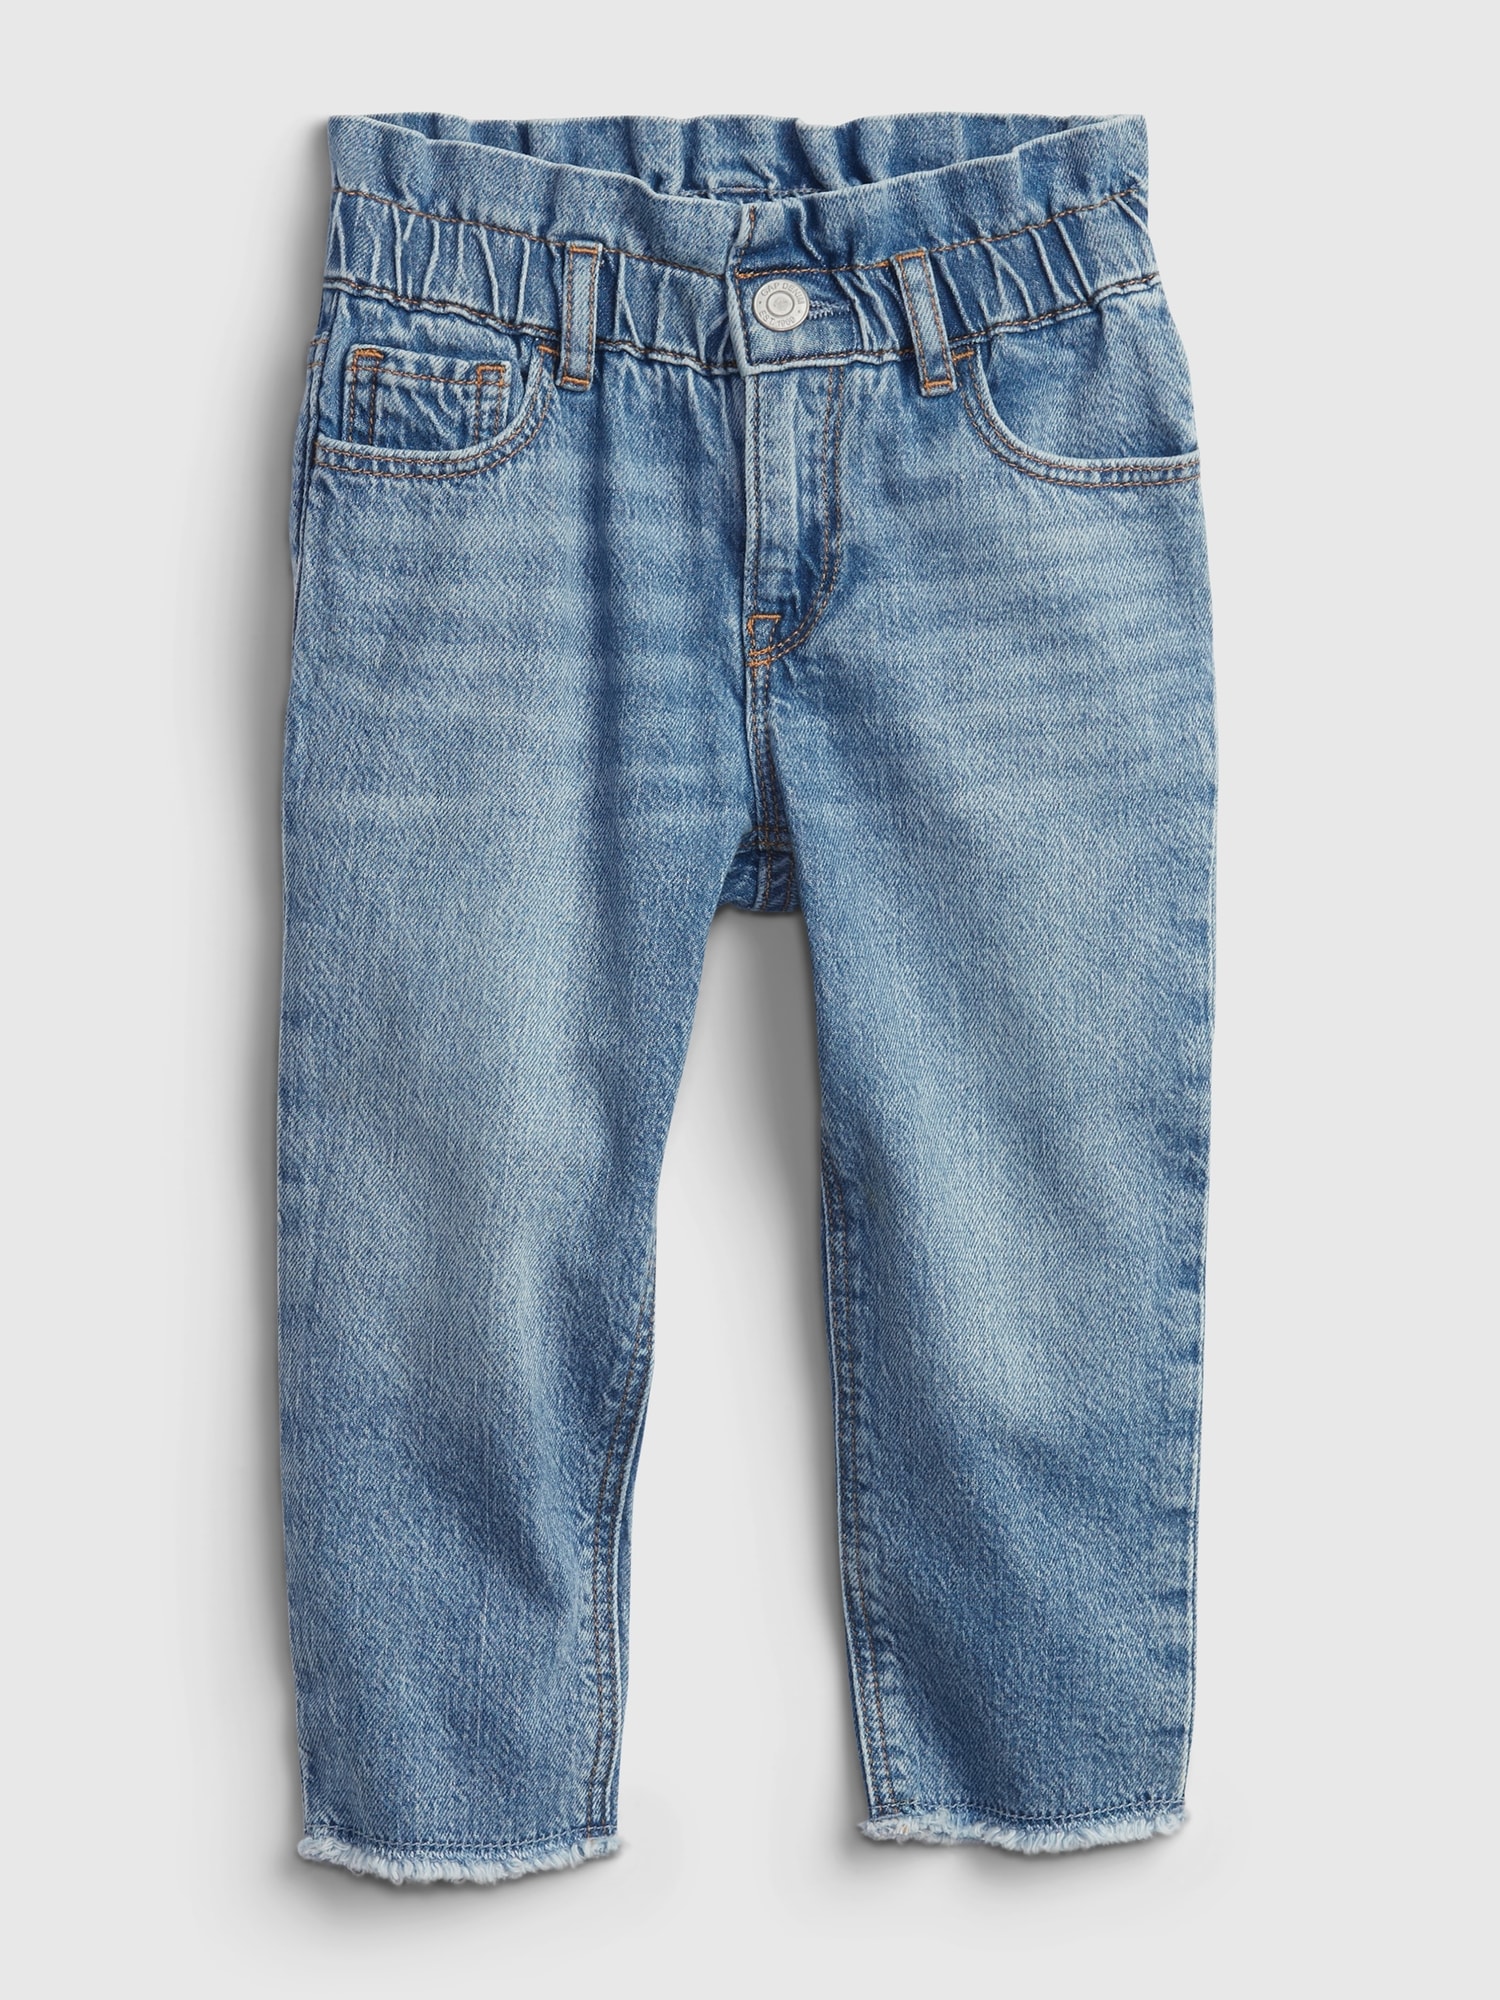 Toddler Pull-On Just Like Mom Jeans | Gap